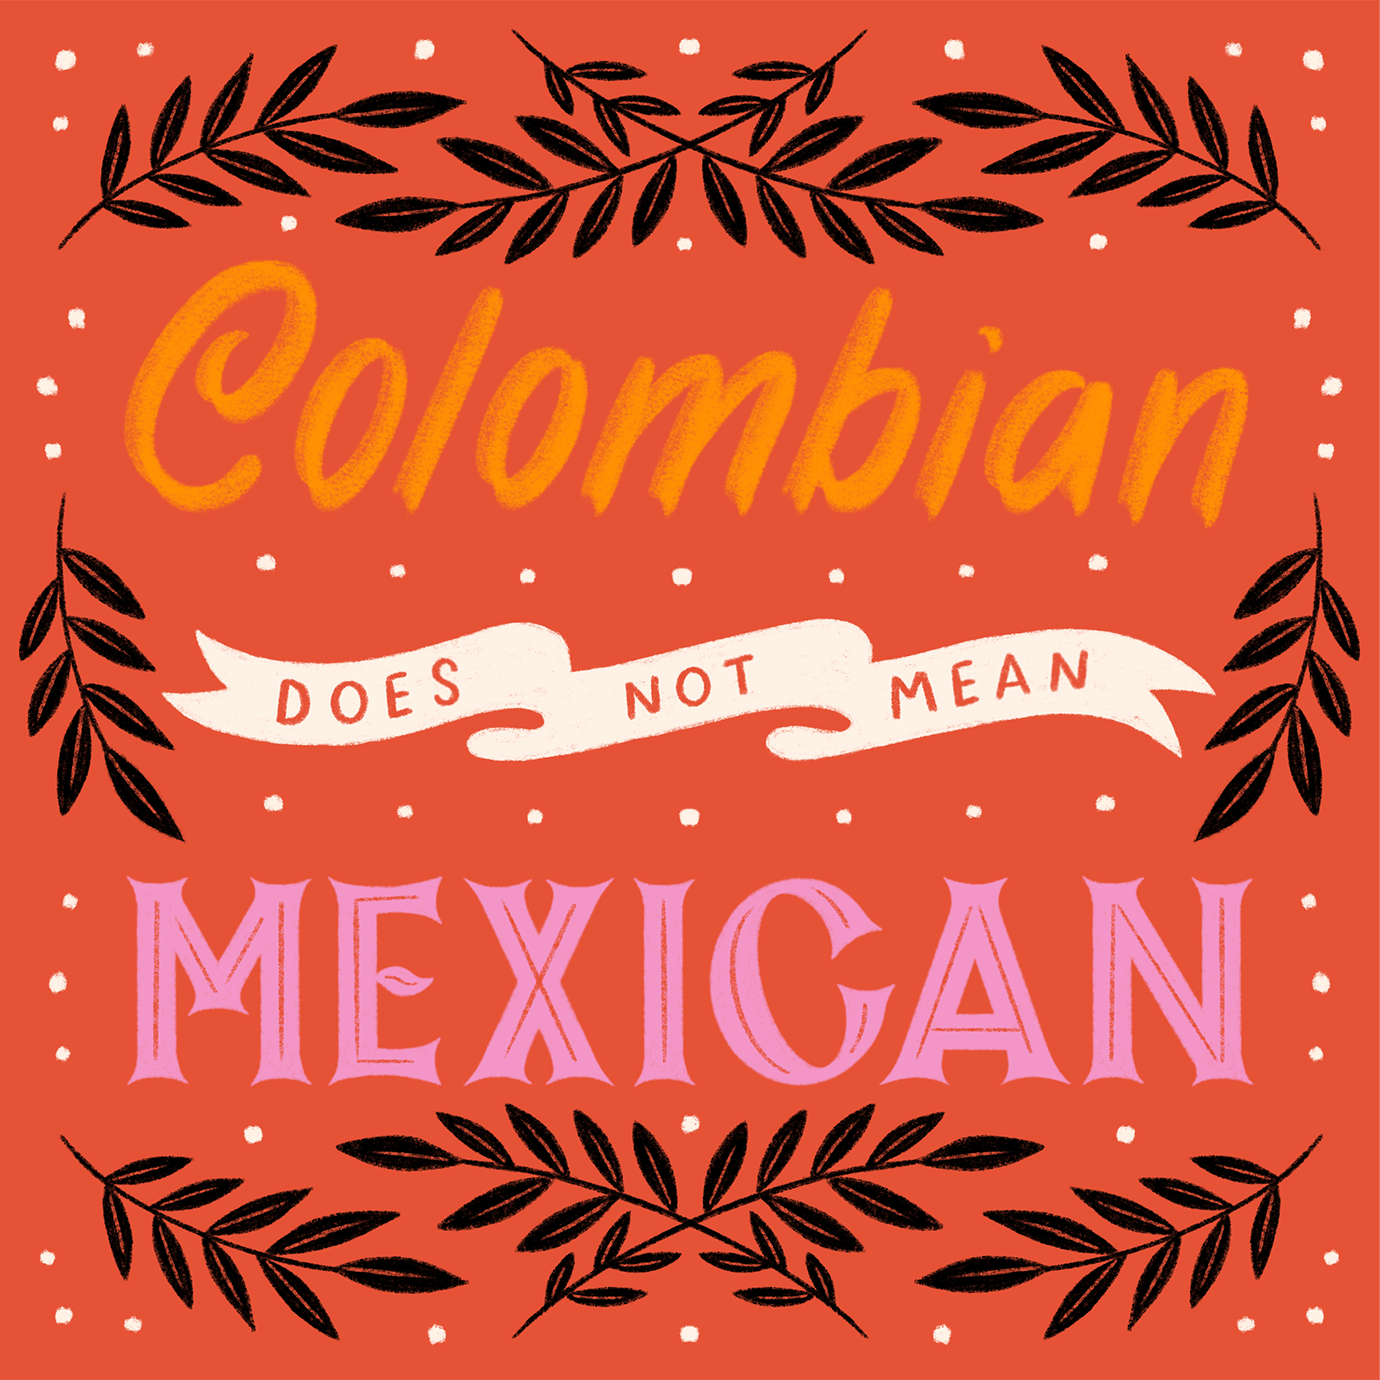 Colombian does not mean Mexican by Andrea Rochelle